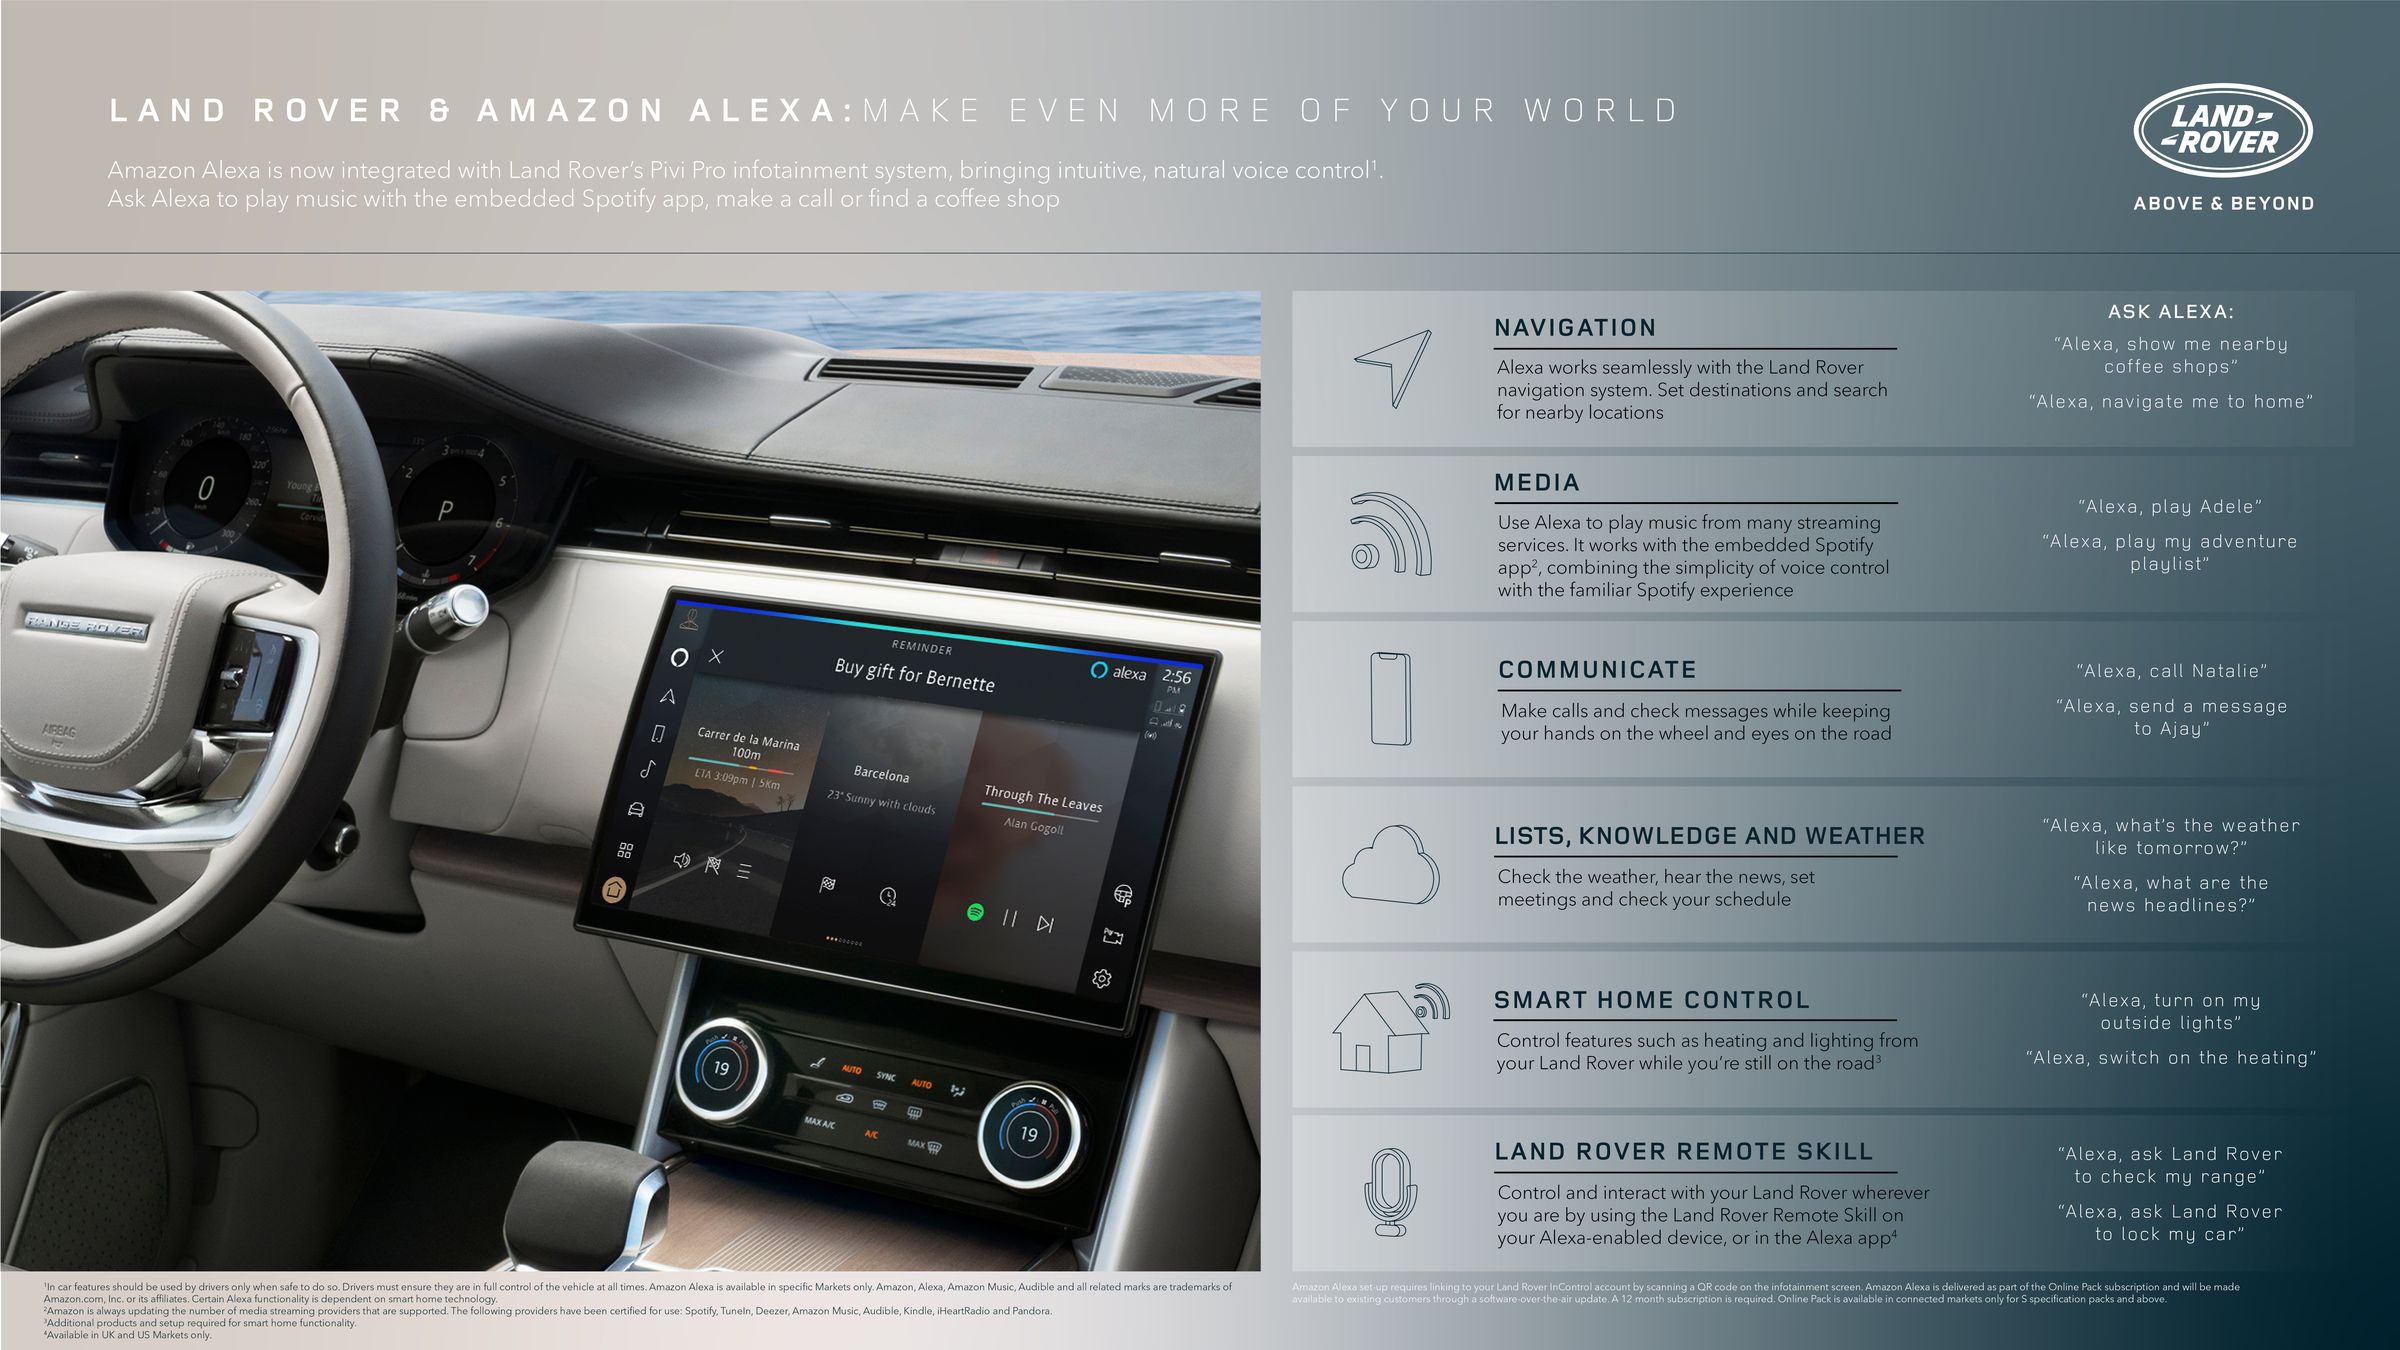 An infographic of some of the things Alexa can do in a Land Rover equipped with the new software.